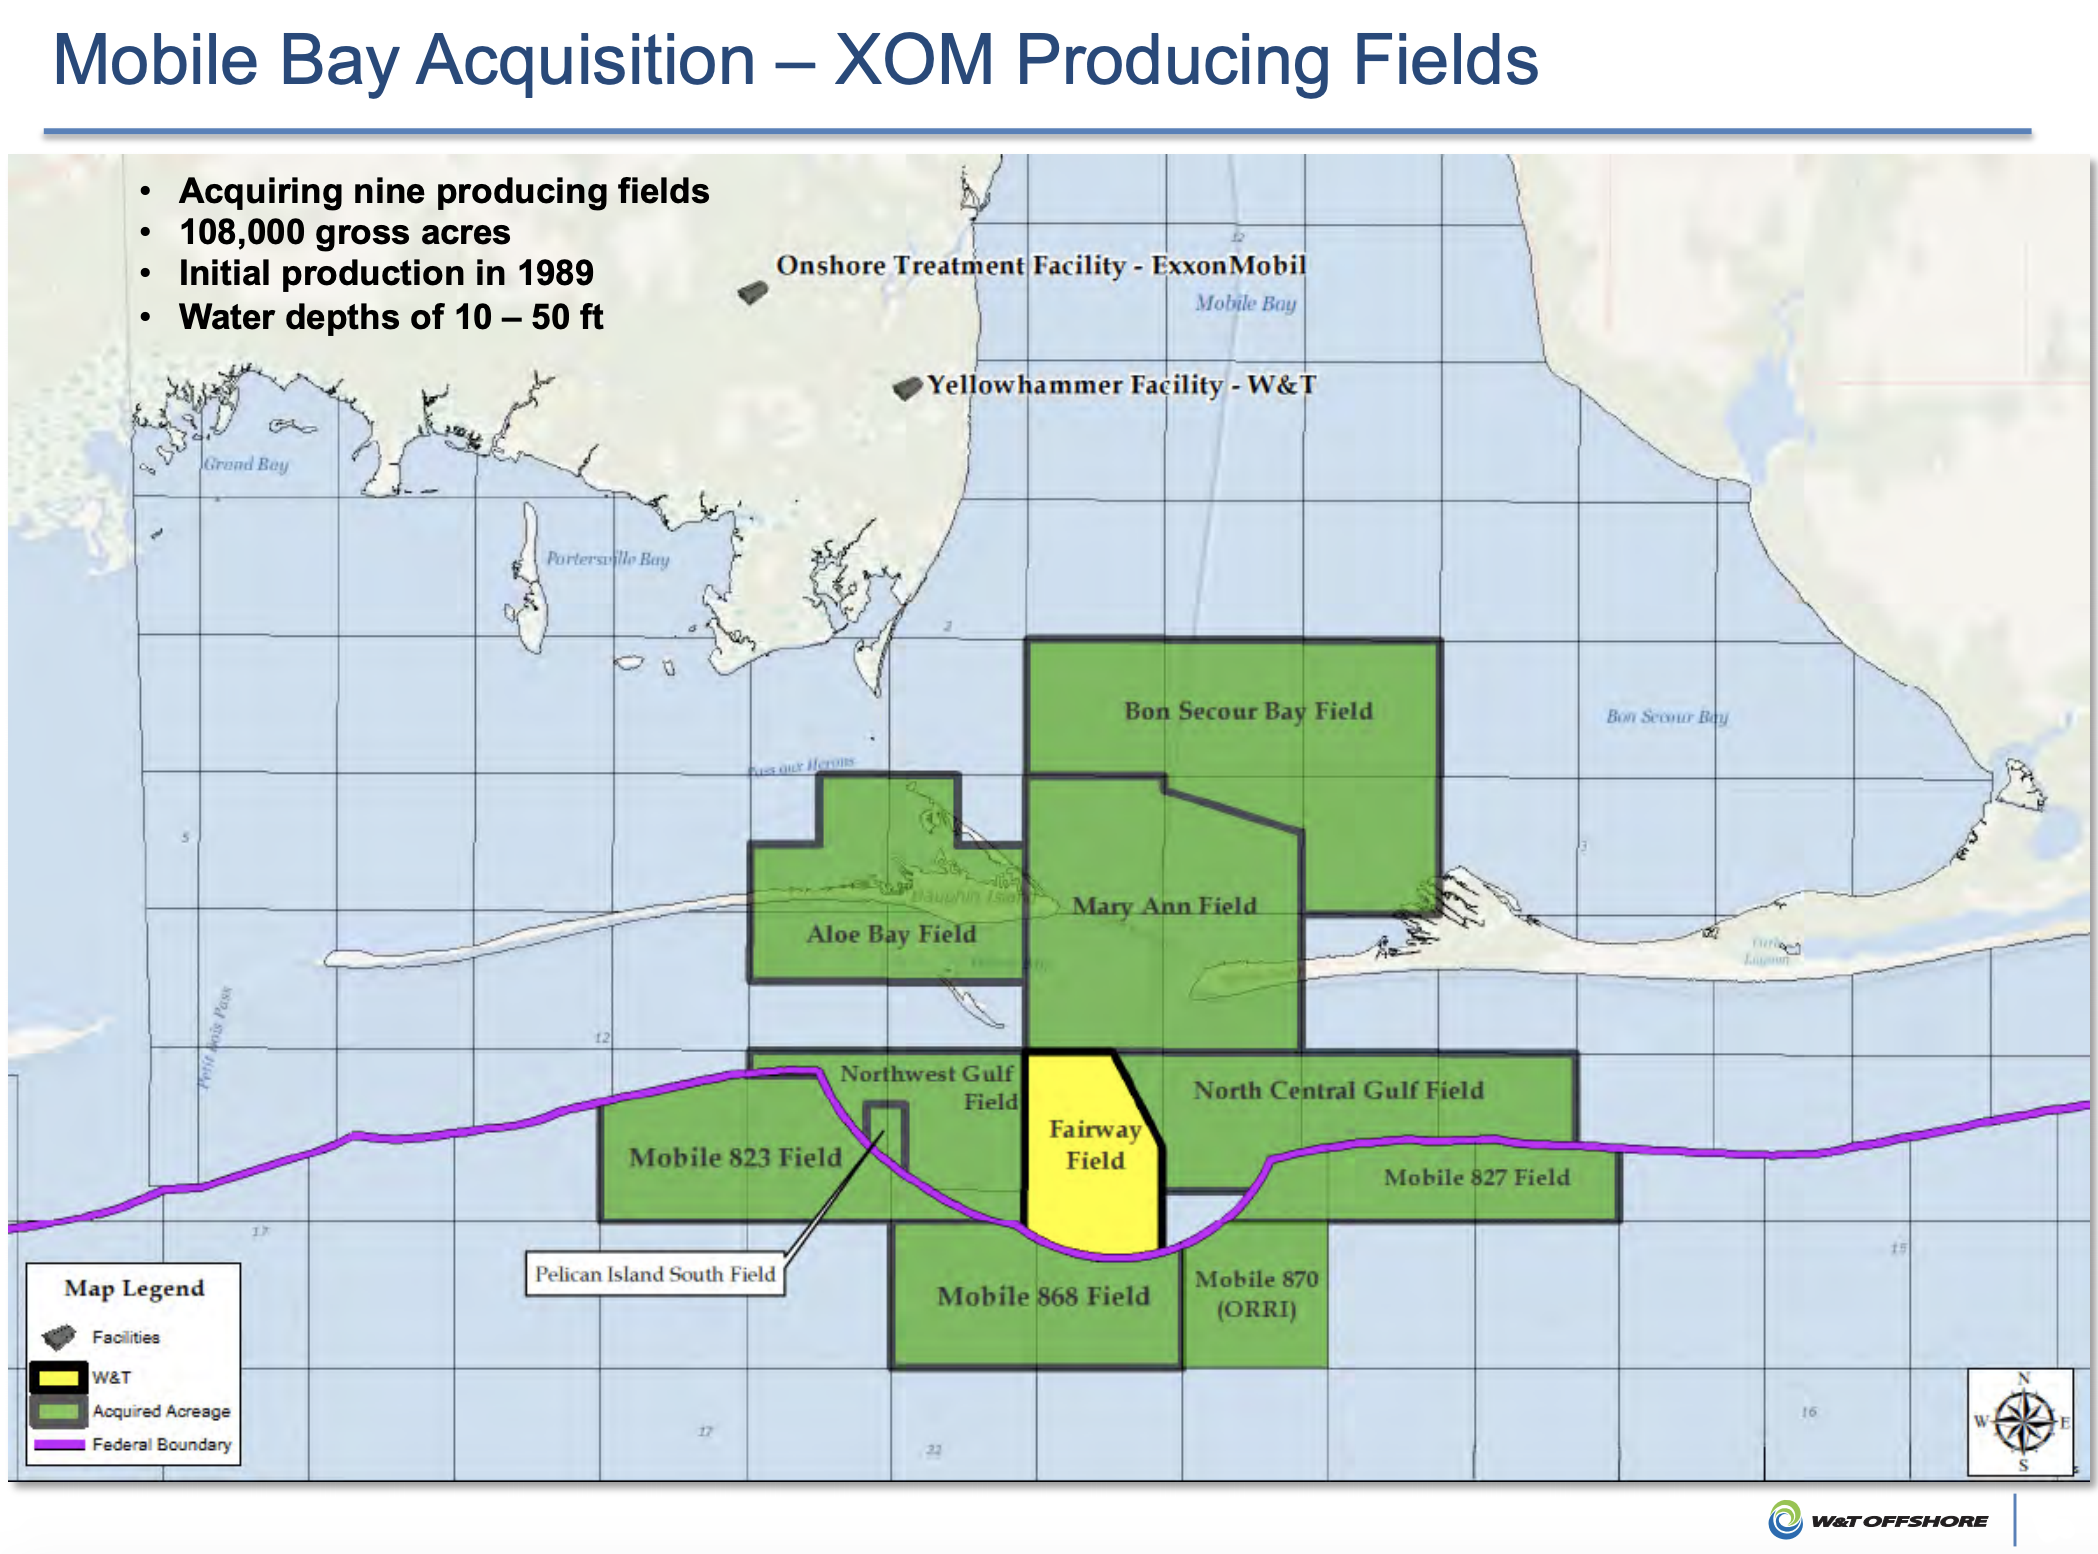 W&T Offshore Mobile Bay Acquisition Asset Map (Source: W&T Offshore Inc. June 2019 Investor Presentation)